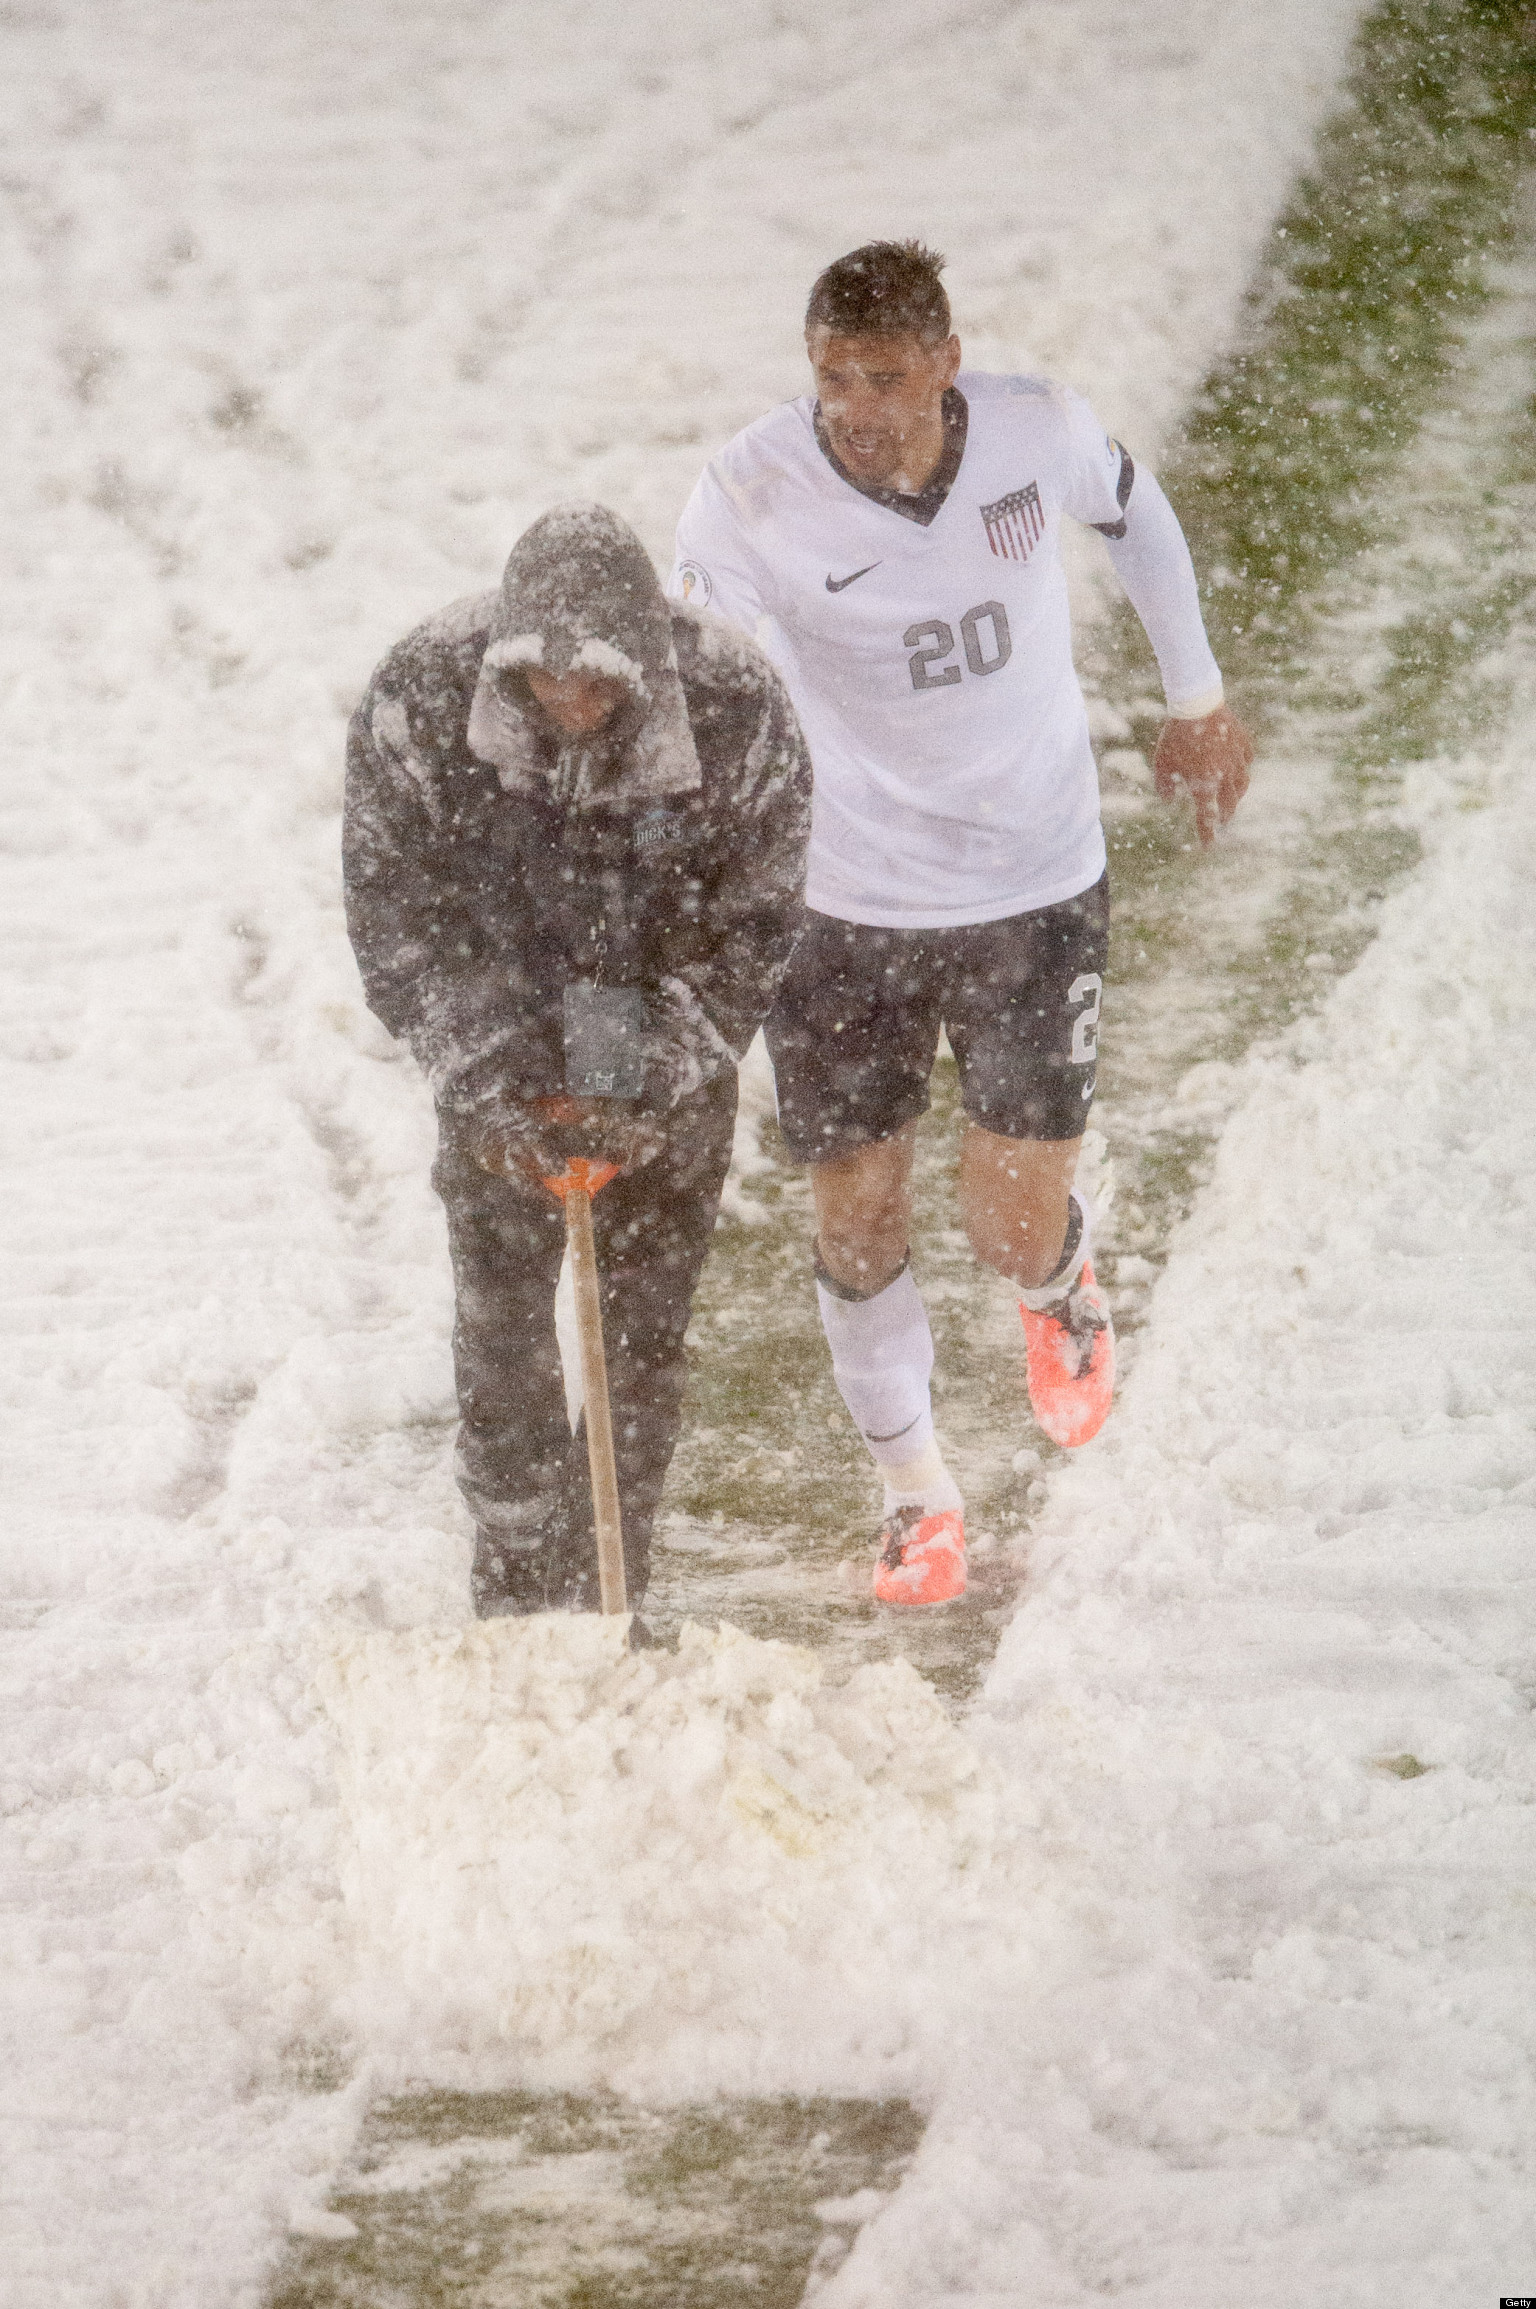 Costa Rica Demand Replay With USA After Snowstorm Defeat (PICTURES